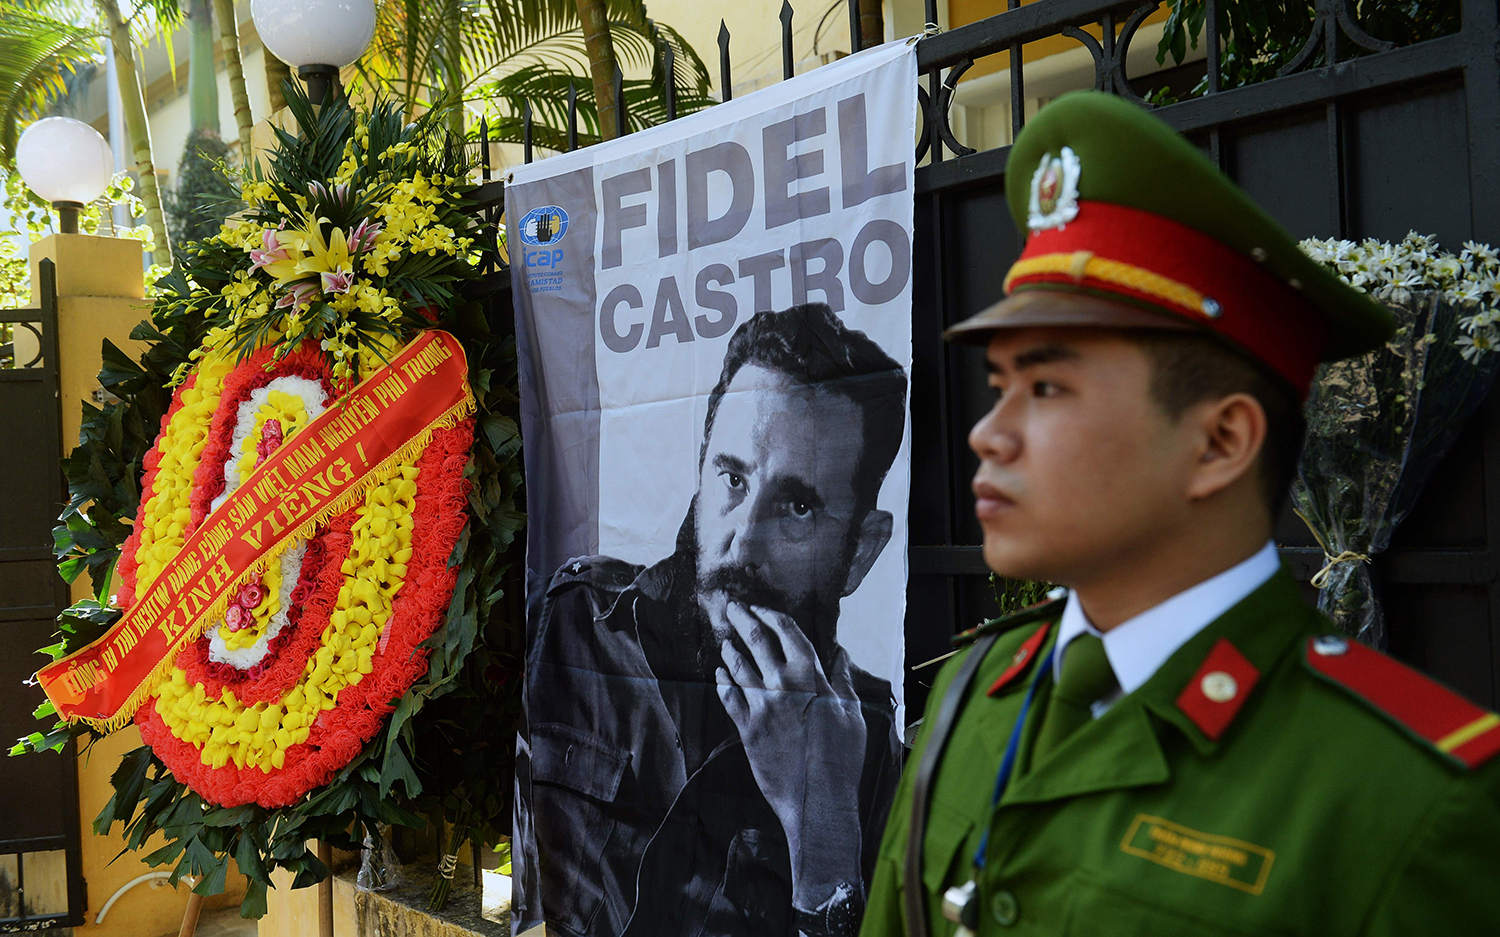 TOPSHOT - The wreath of Vietnam Communist Party Secretary General Nguyen Phu Trong is seen placed next to a large portrait of Fidel Castro posted in front of the Cuban embassy in Hanoi as Trong (not pictured) prepares to pay tribute to the late Cuban leader, on November 28, 2016. Communist heavyweights China and Vietnam were swift to lament the death of Fidel Castro, with Hanoi's state media leading tributes to the loss of a "great friend and comrade". / AFP PHOTO / HOANG DINH NAM / TT / kod 444